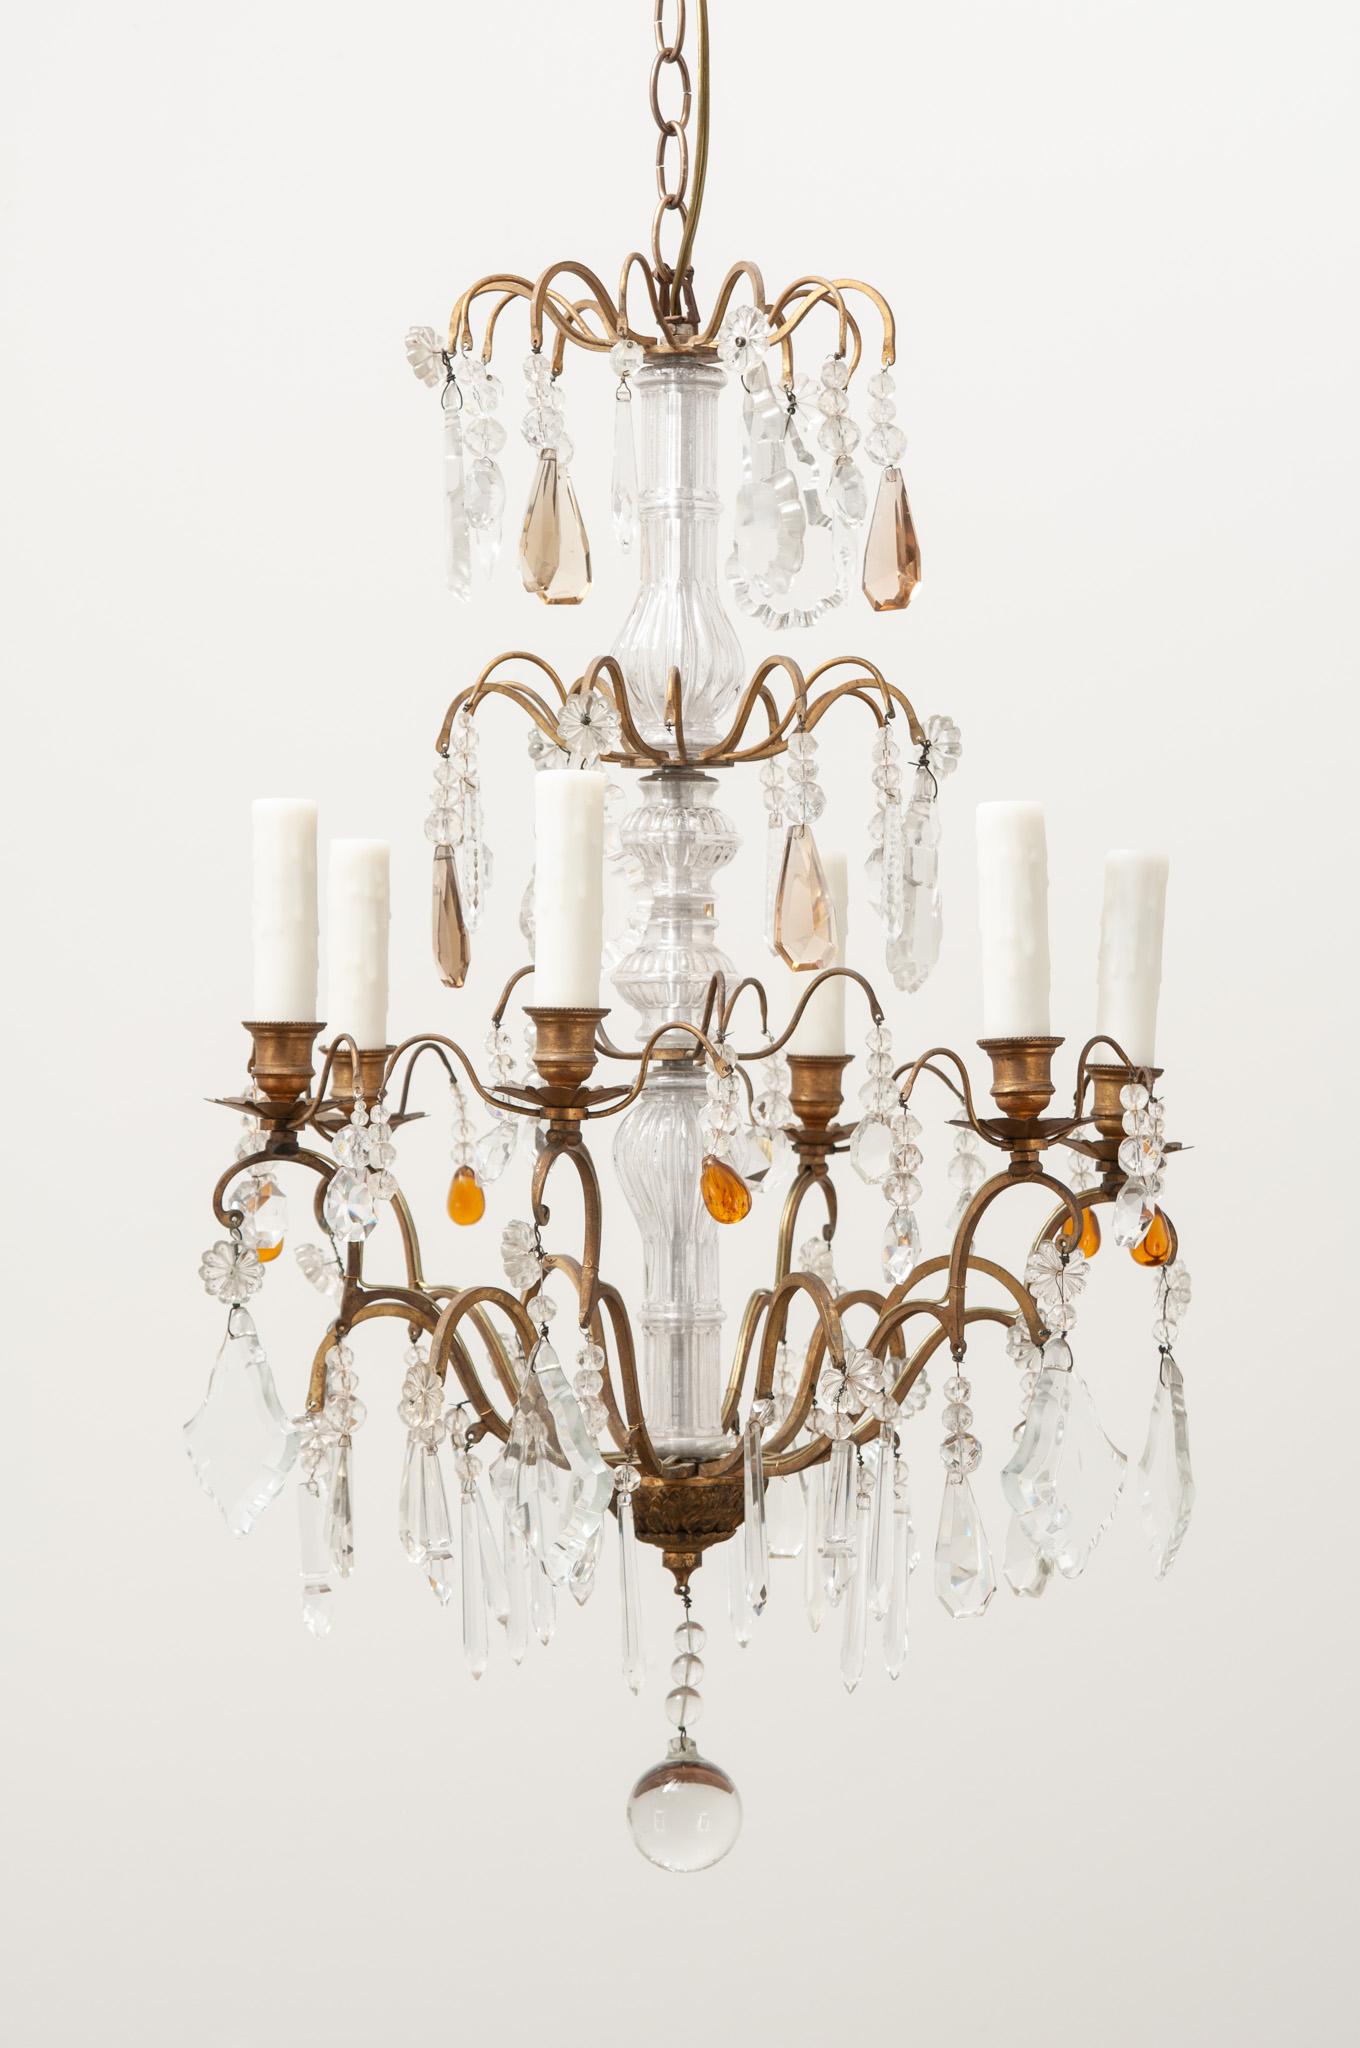 An elegant 6-light brass and crystal chandelier made in France. This chandelier has a brass frame with cut crystal drops hanging from its curving arms. There are six lights each with faux candle covers. This light fixture has been cleaned and wired